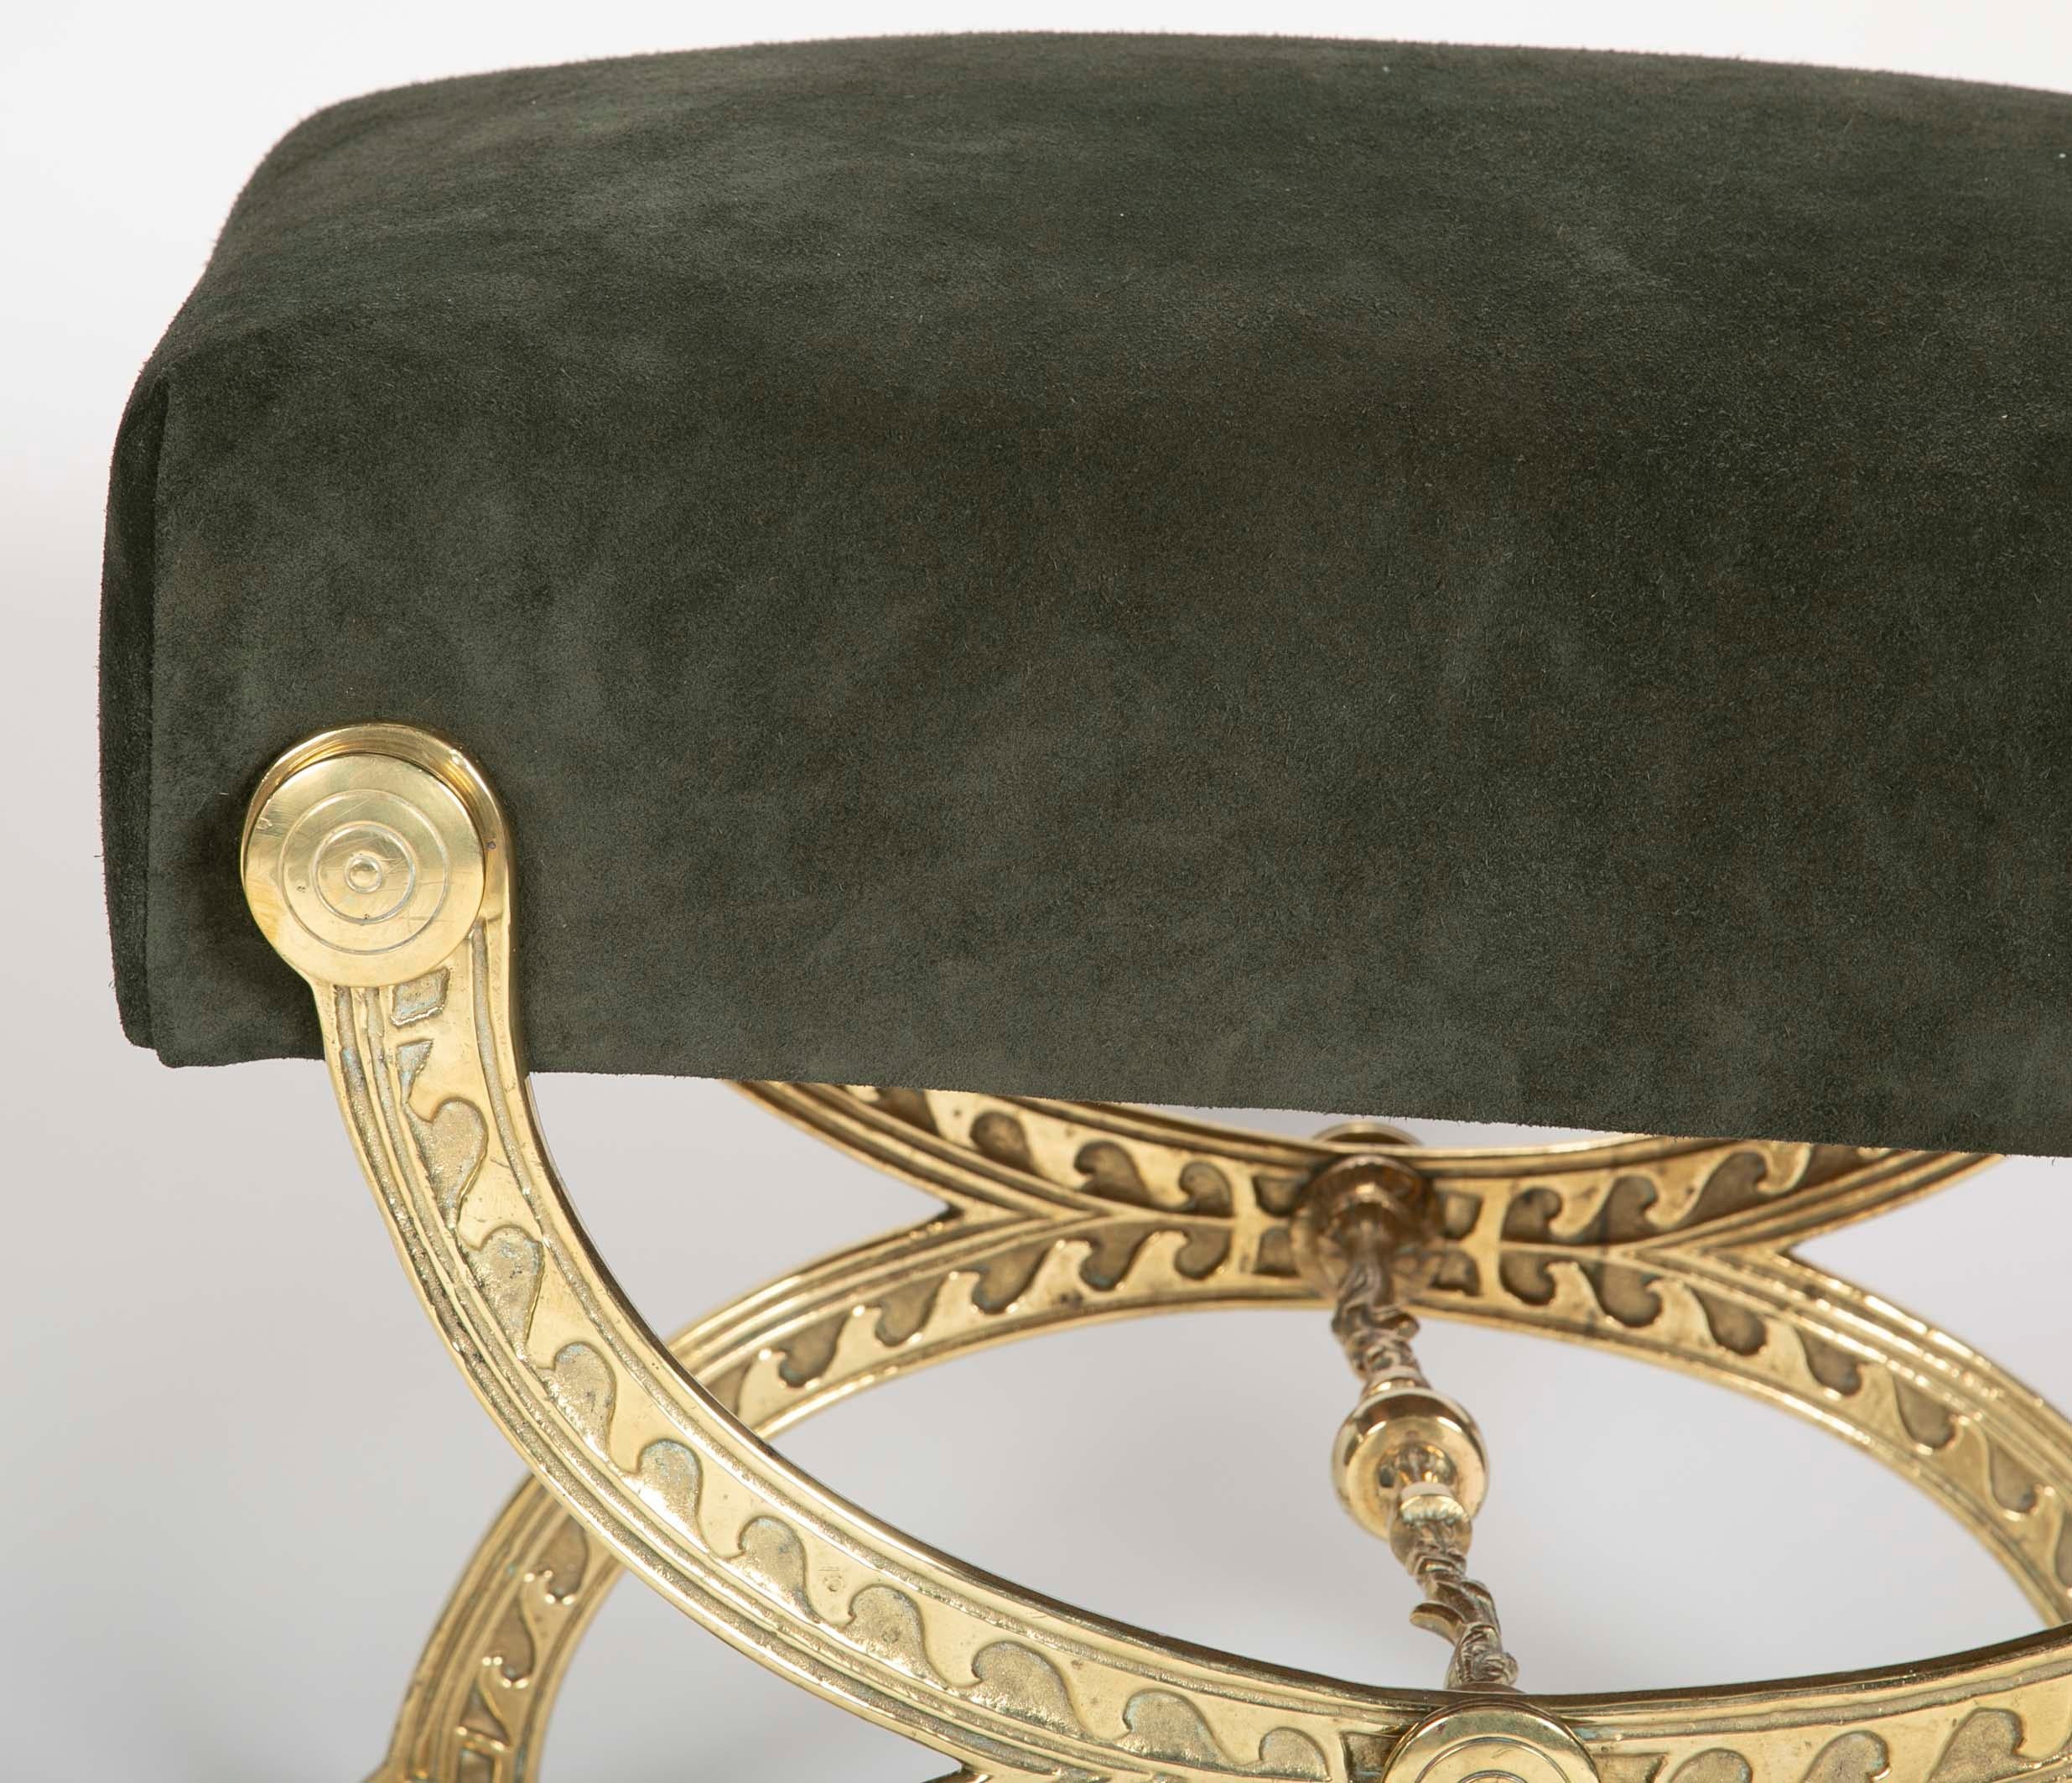 20th Century Brass and Suede Curule Form Neoclassical Style Stool with Vitruvian Wave Motif